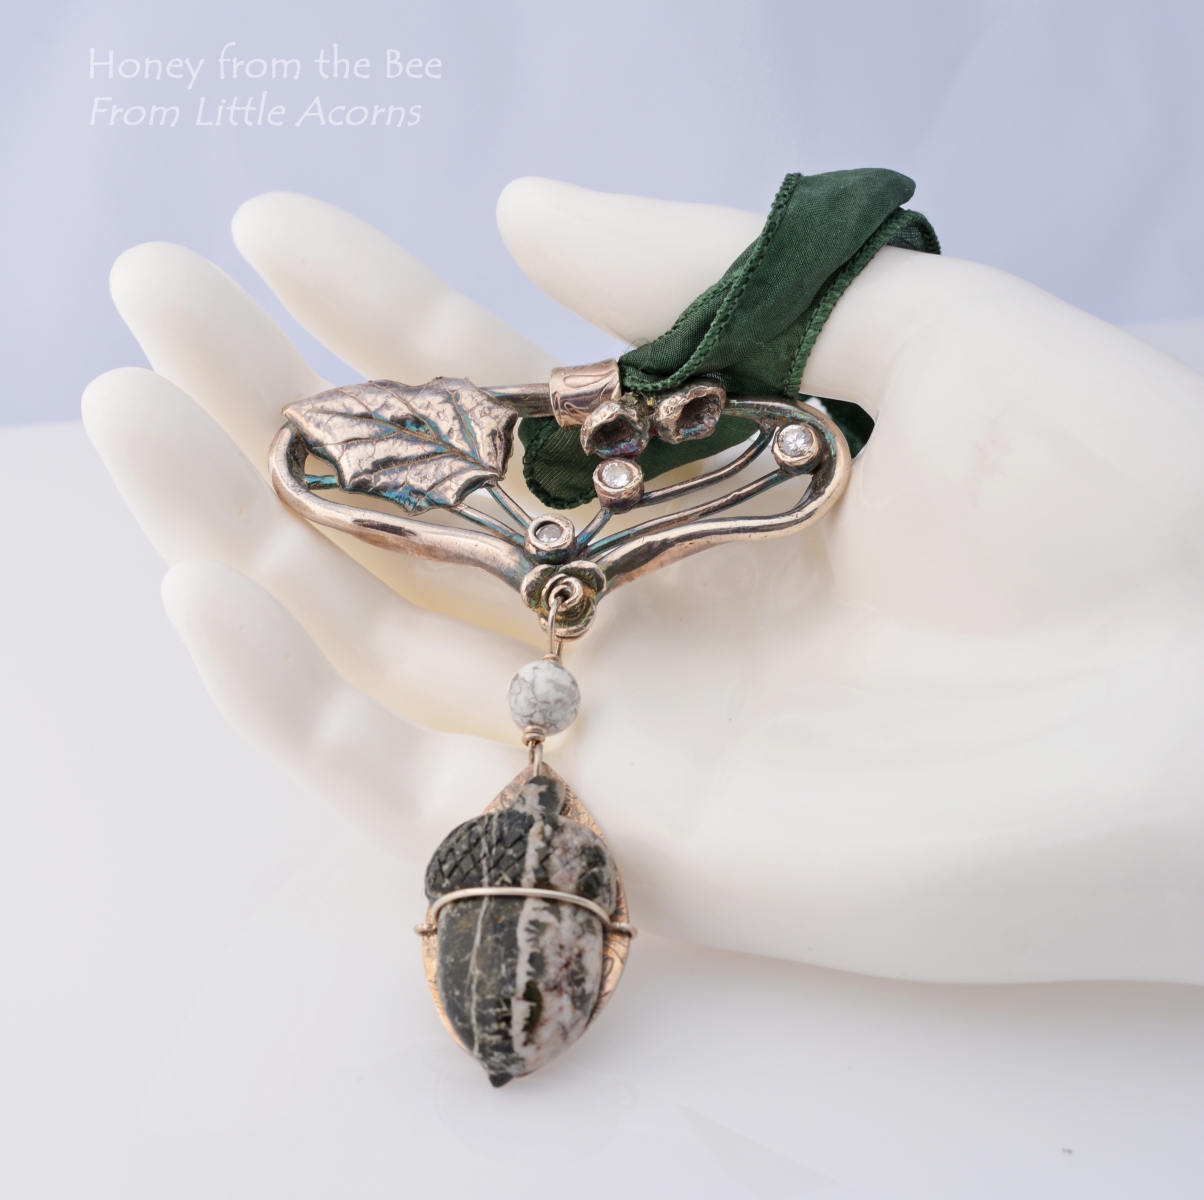 Art Nouveau Artisan Necklace by Honey from the Bee